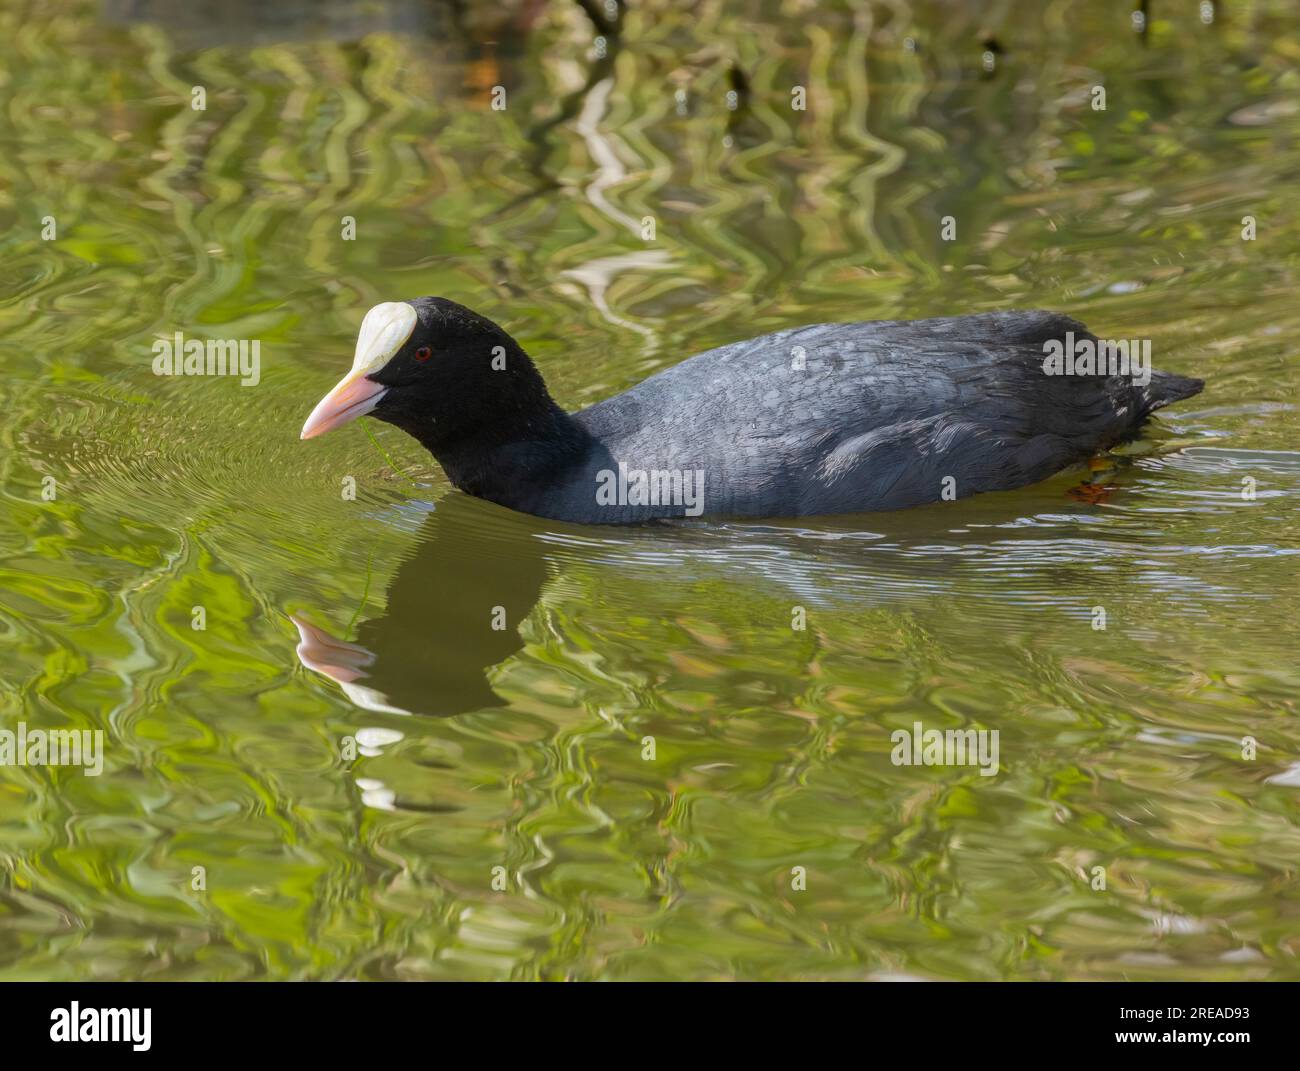 Coot water bird swimming through water with green reflection from reeds Stock Photo